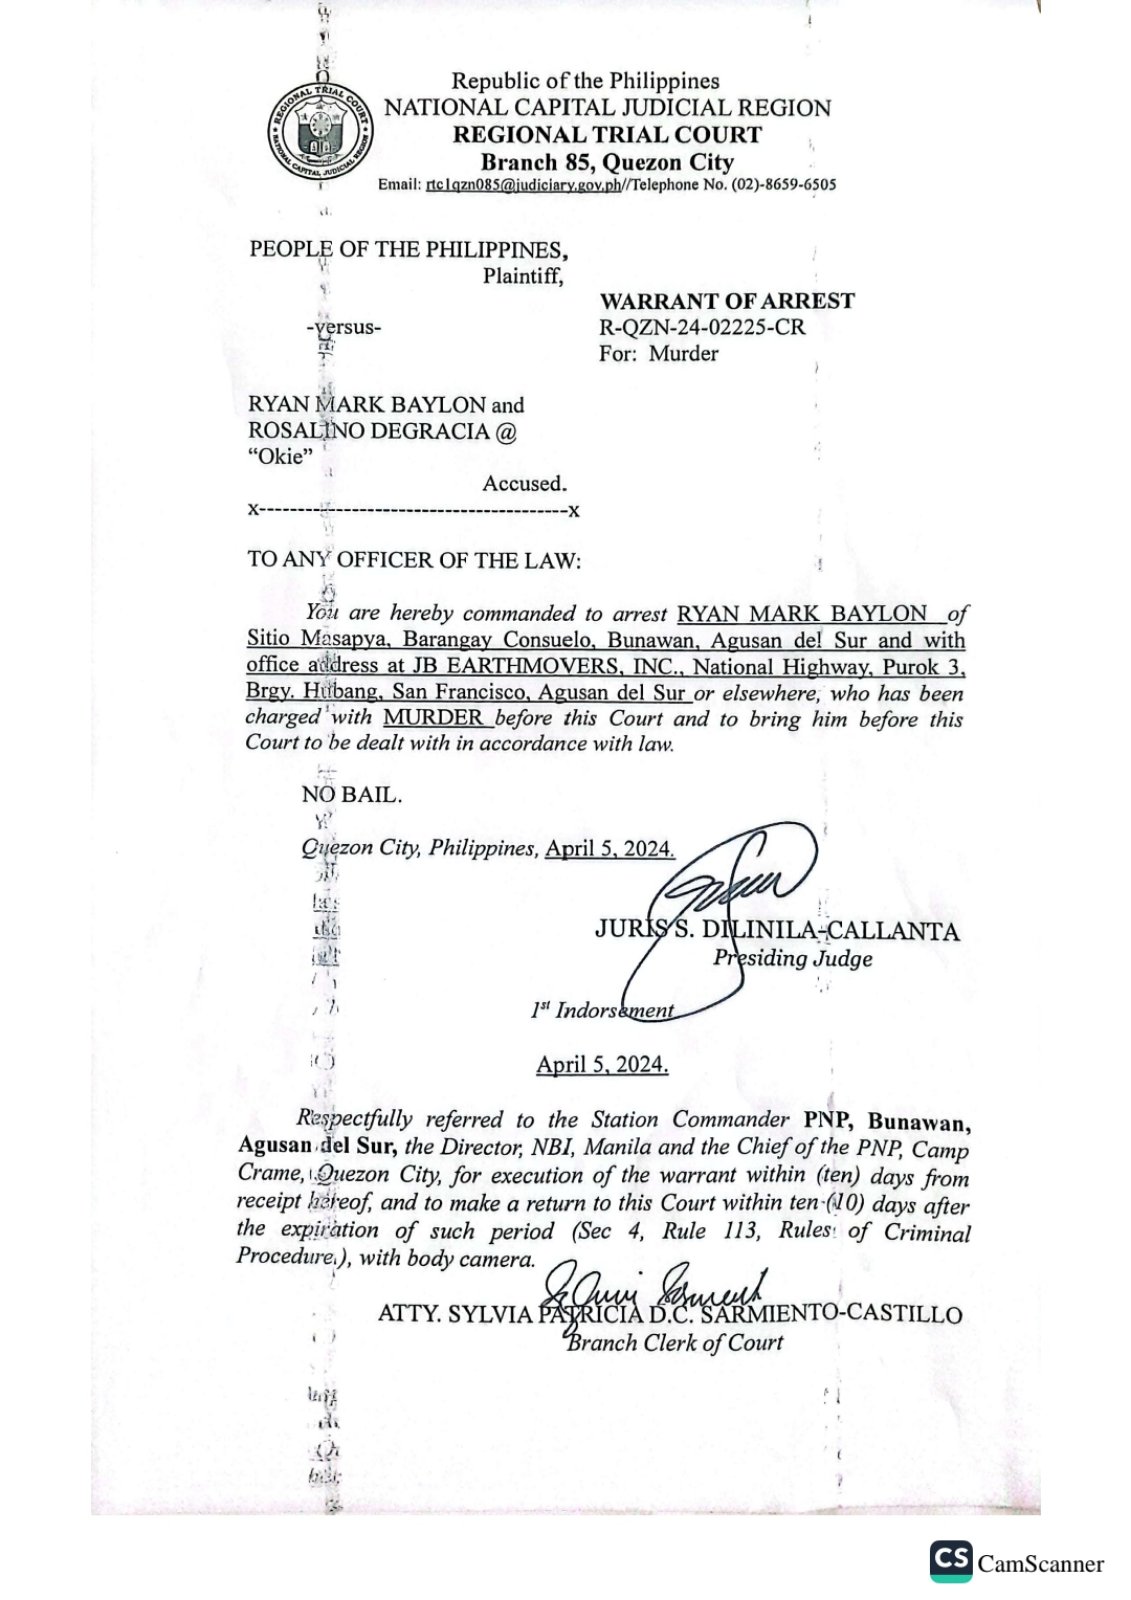 Warrant of arrest against Ryan Mark Baylon, suspected mastermind in the killing of retired Col. Samuel Afdal, a gold mining executive in Agusan del Sur.